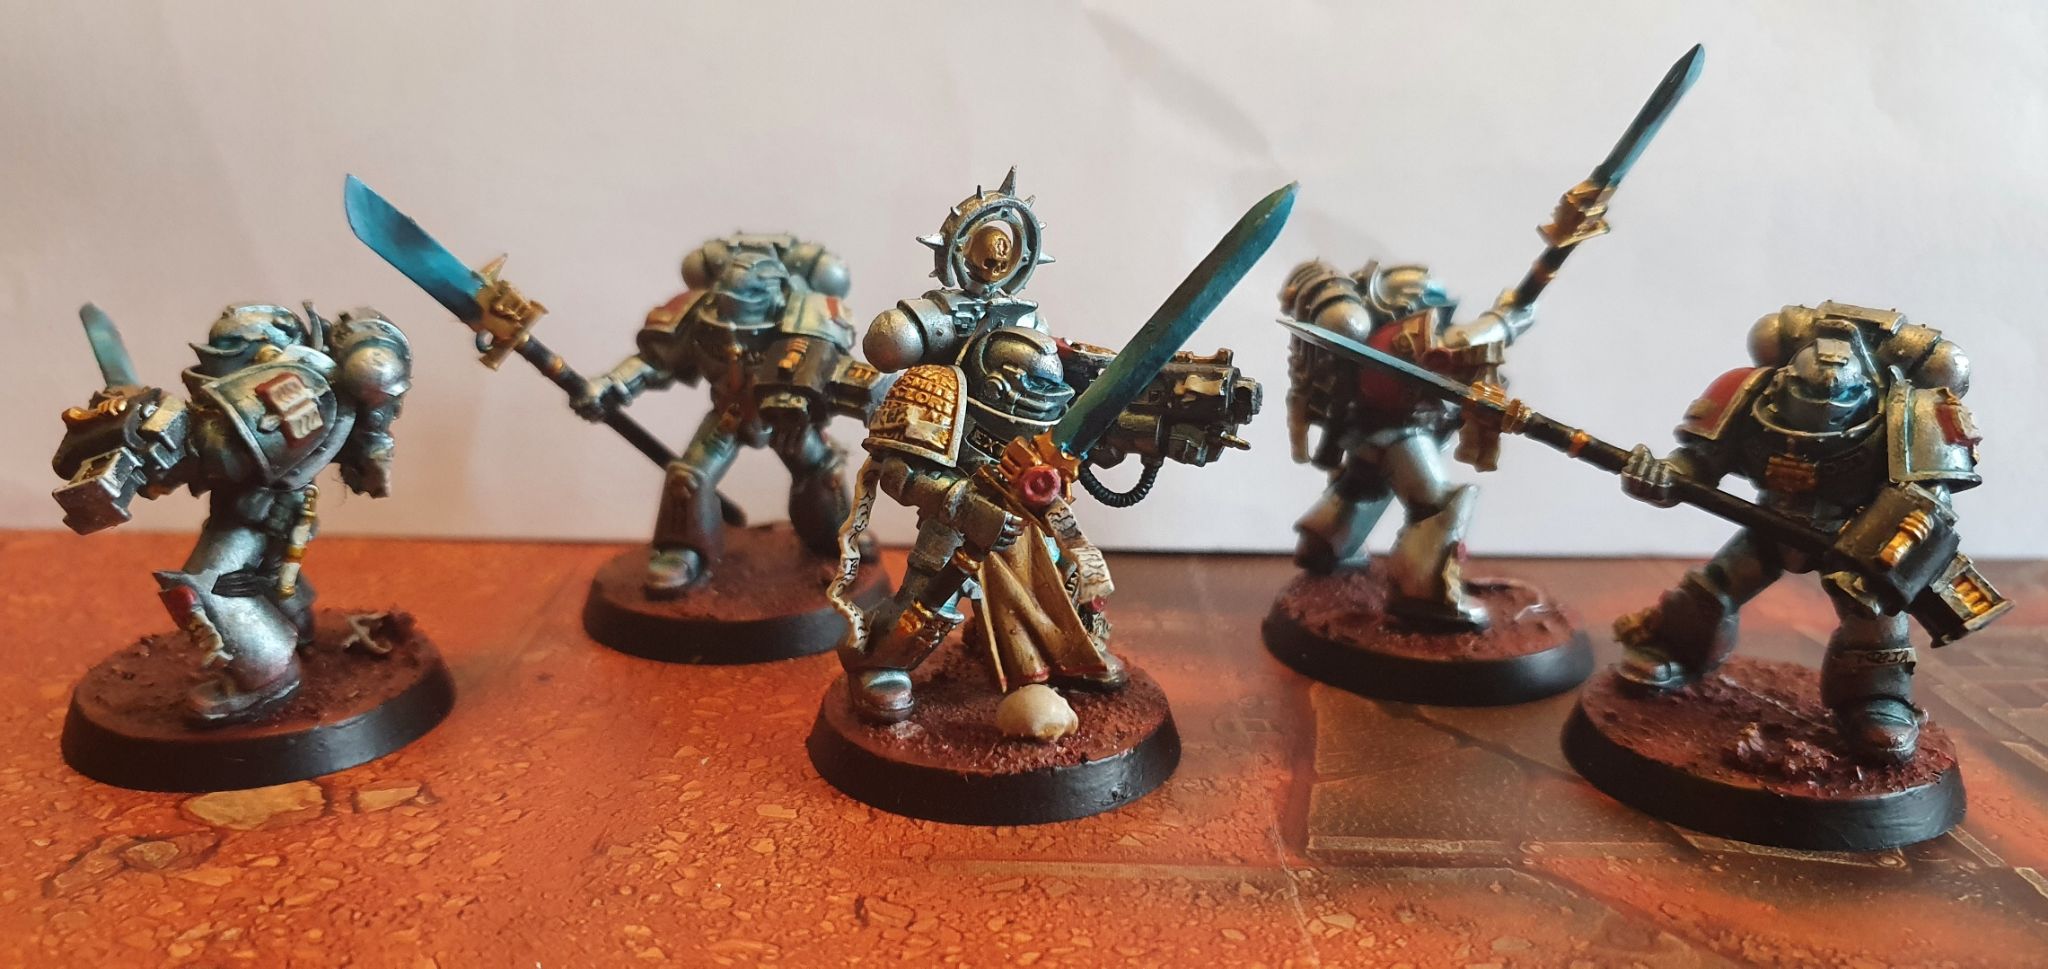 Silver to deep turquose armour, accented with gold.  The Force weapons are deep turquoise to bright blue.  They are on martian sand effect bases, some with light rocks and wire.